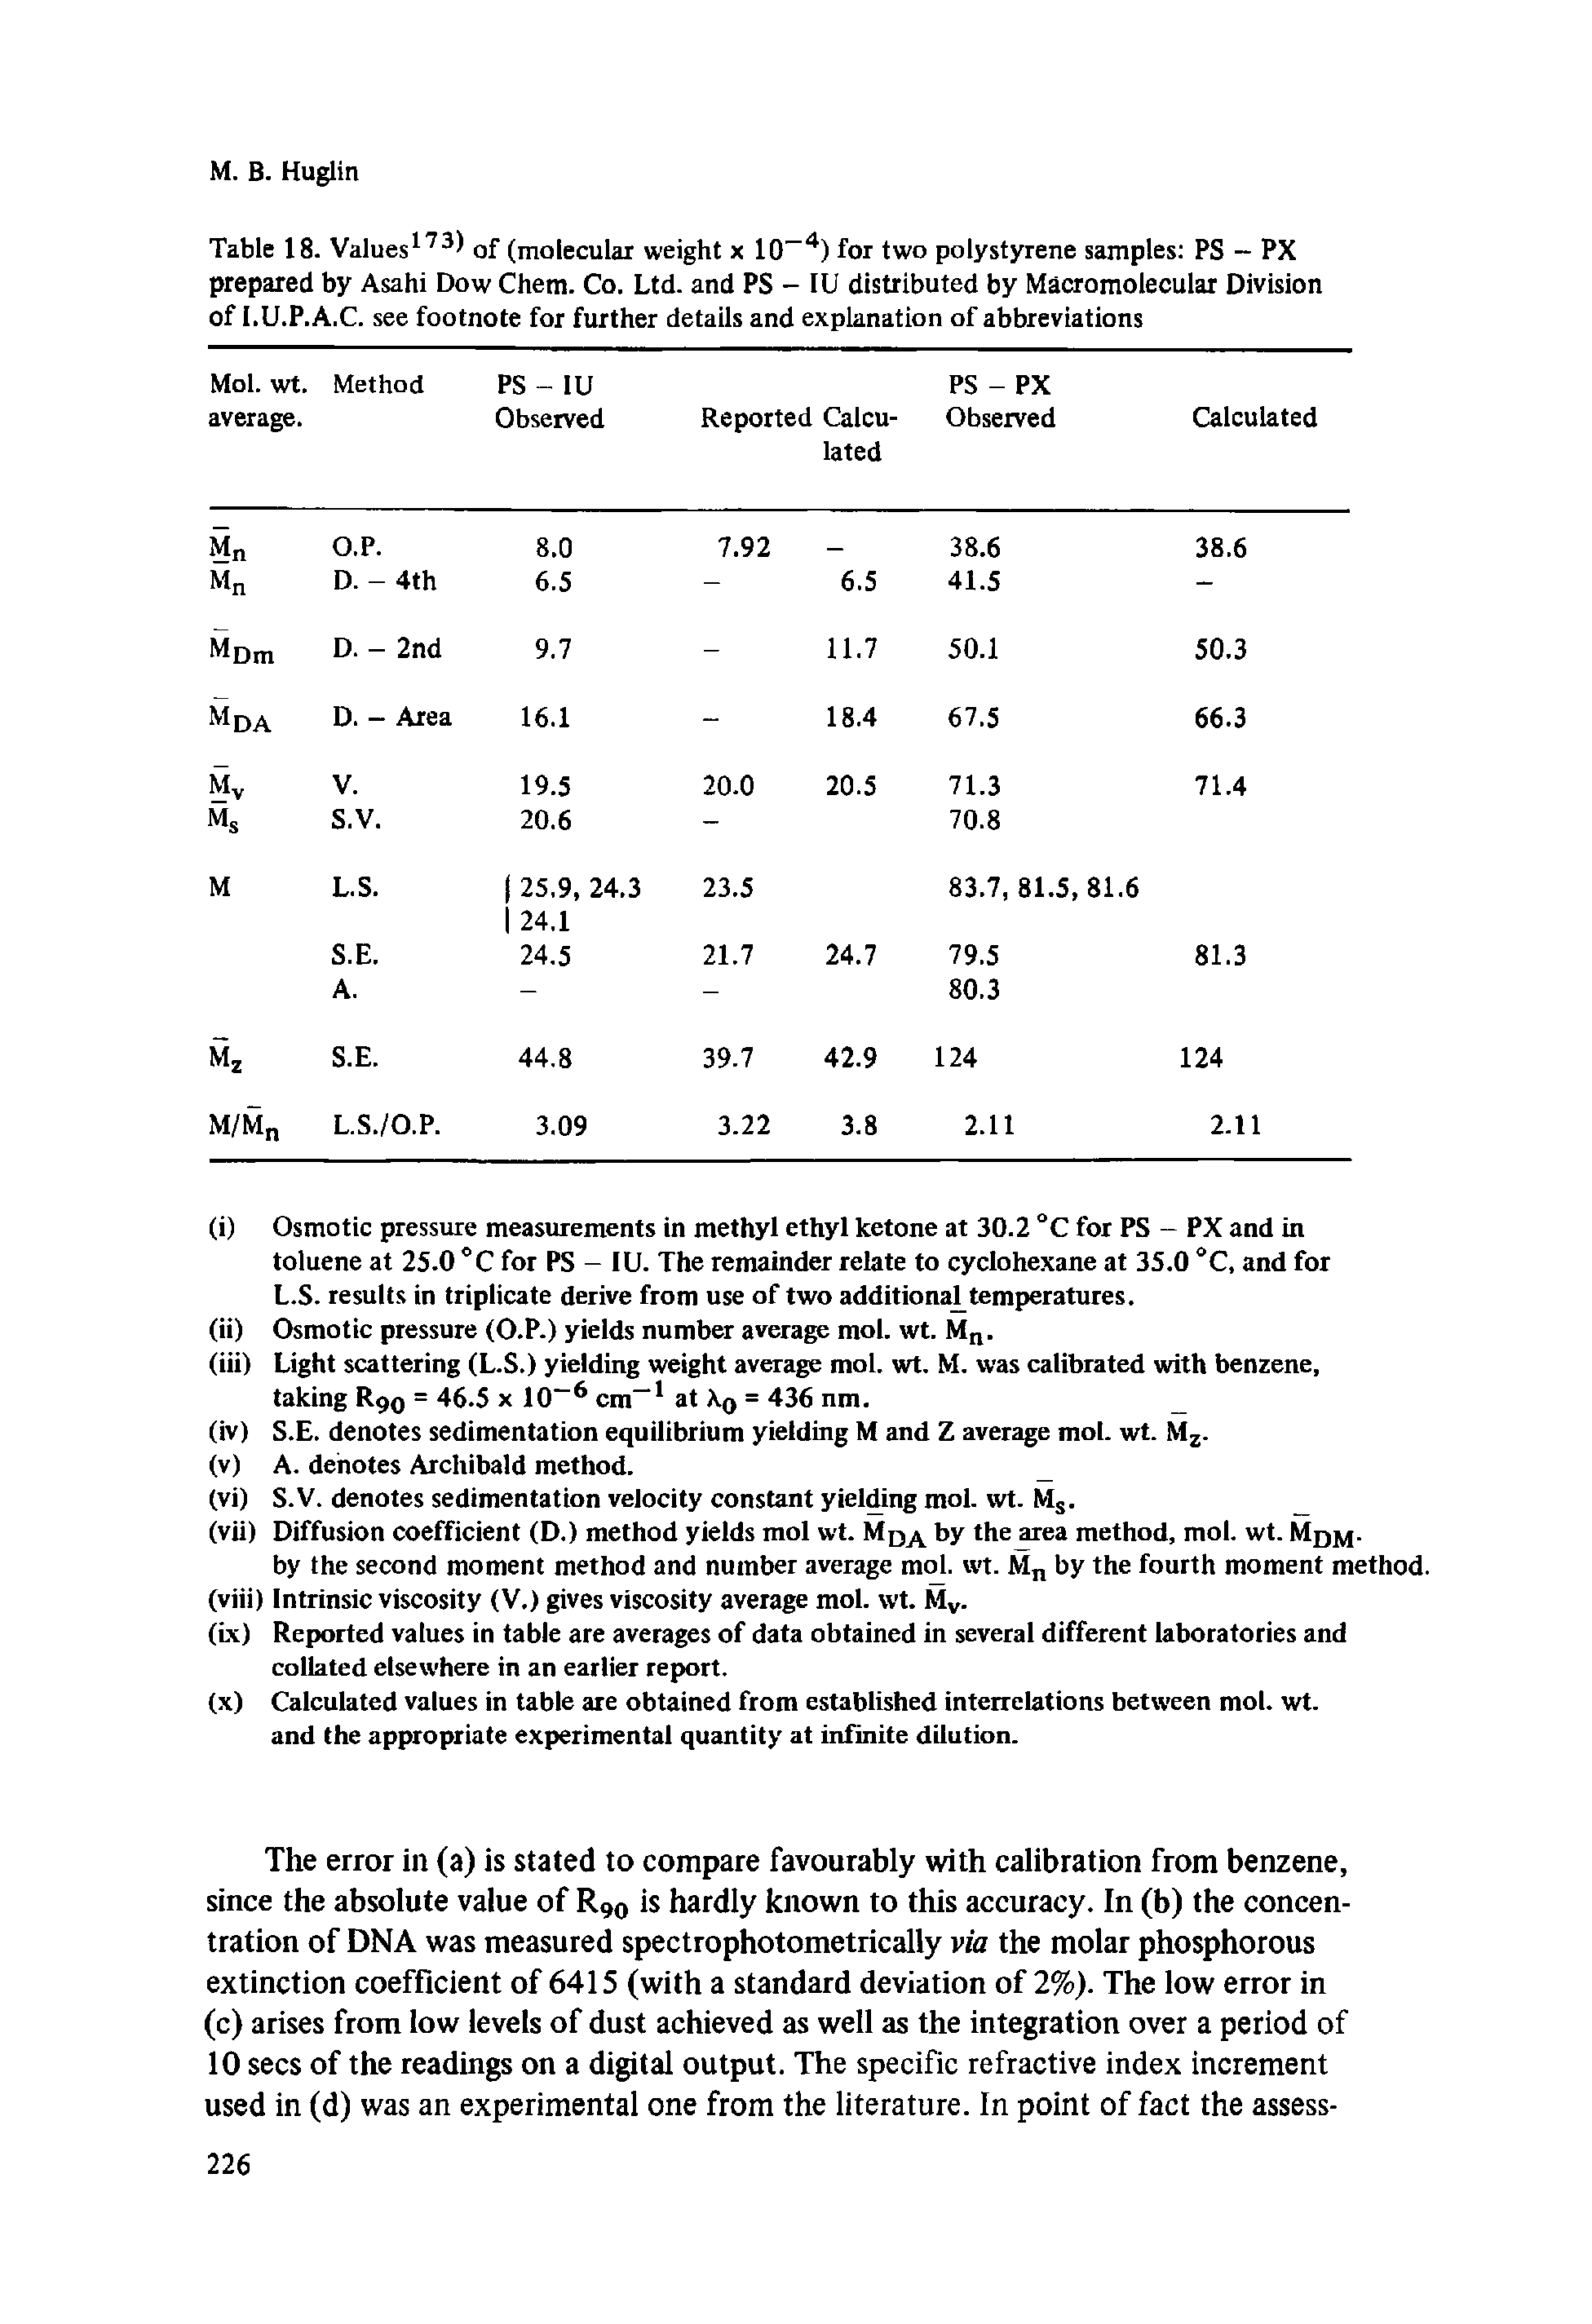 Table 18. Values173) of (molecular weight x 10-4) for two polystyrene samples PS - PX prepared by Asahi Dow Chem. Co. Ltd. and PS - IU distributed by Macromolecular Division of I.U.P.A.C. see footnote for further details and explanation of abbreviations...